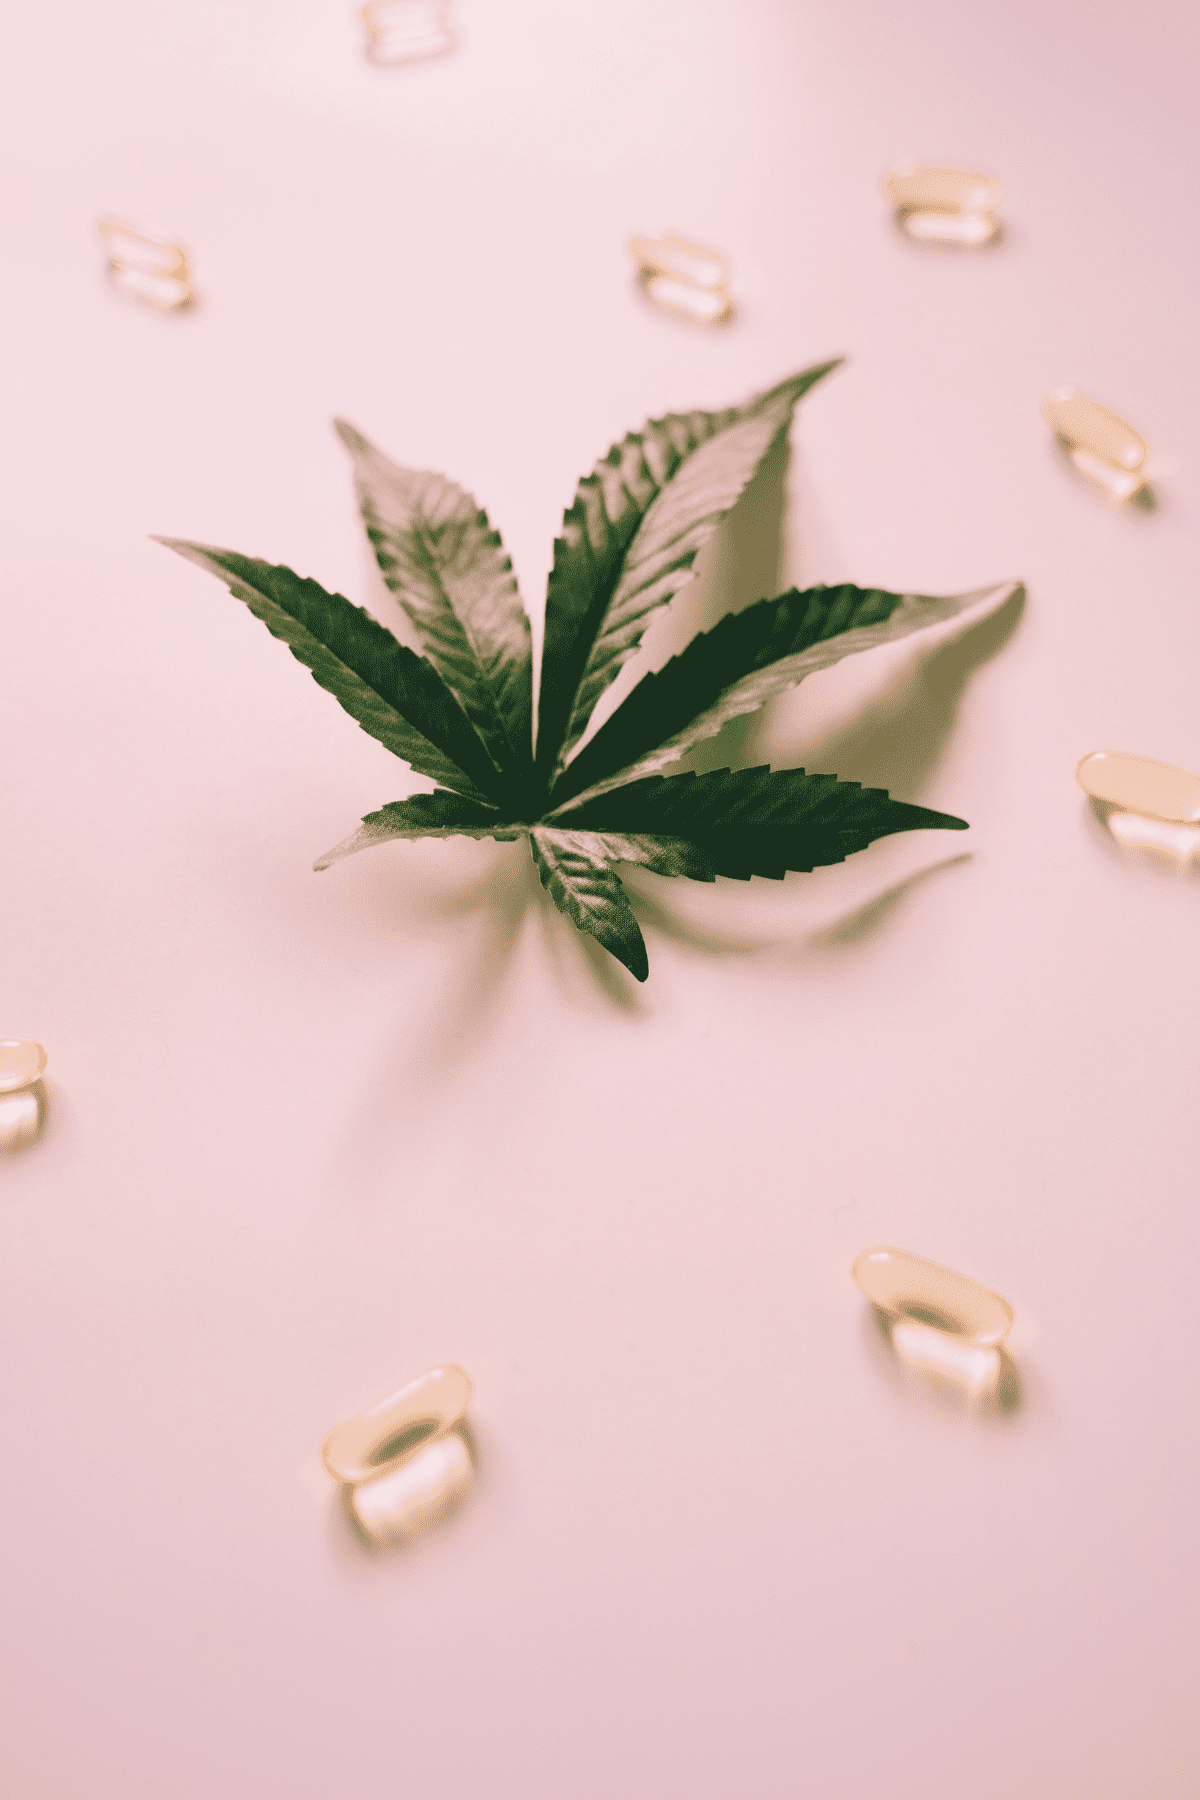 A picture of a cannabis leaf and capsule on a pink background.